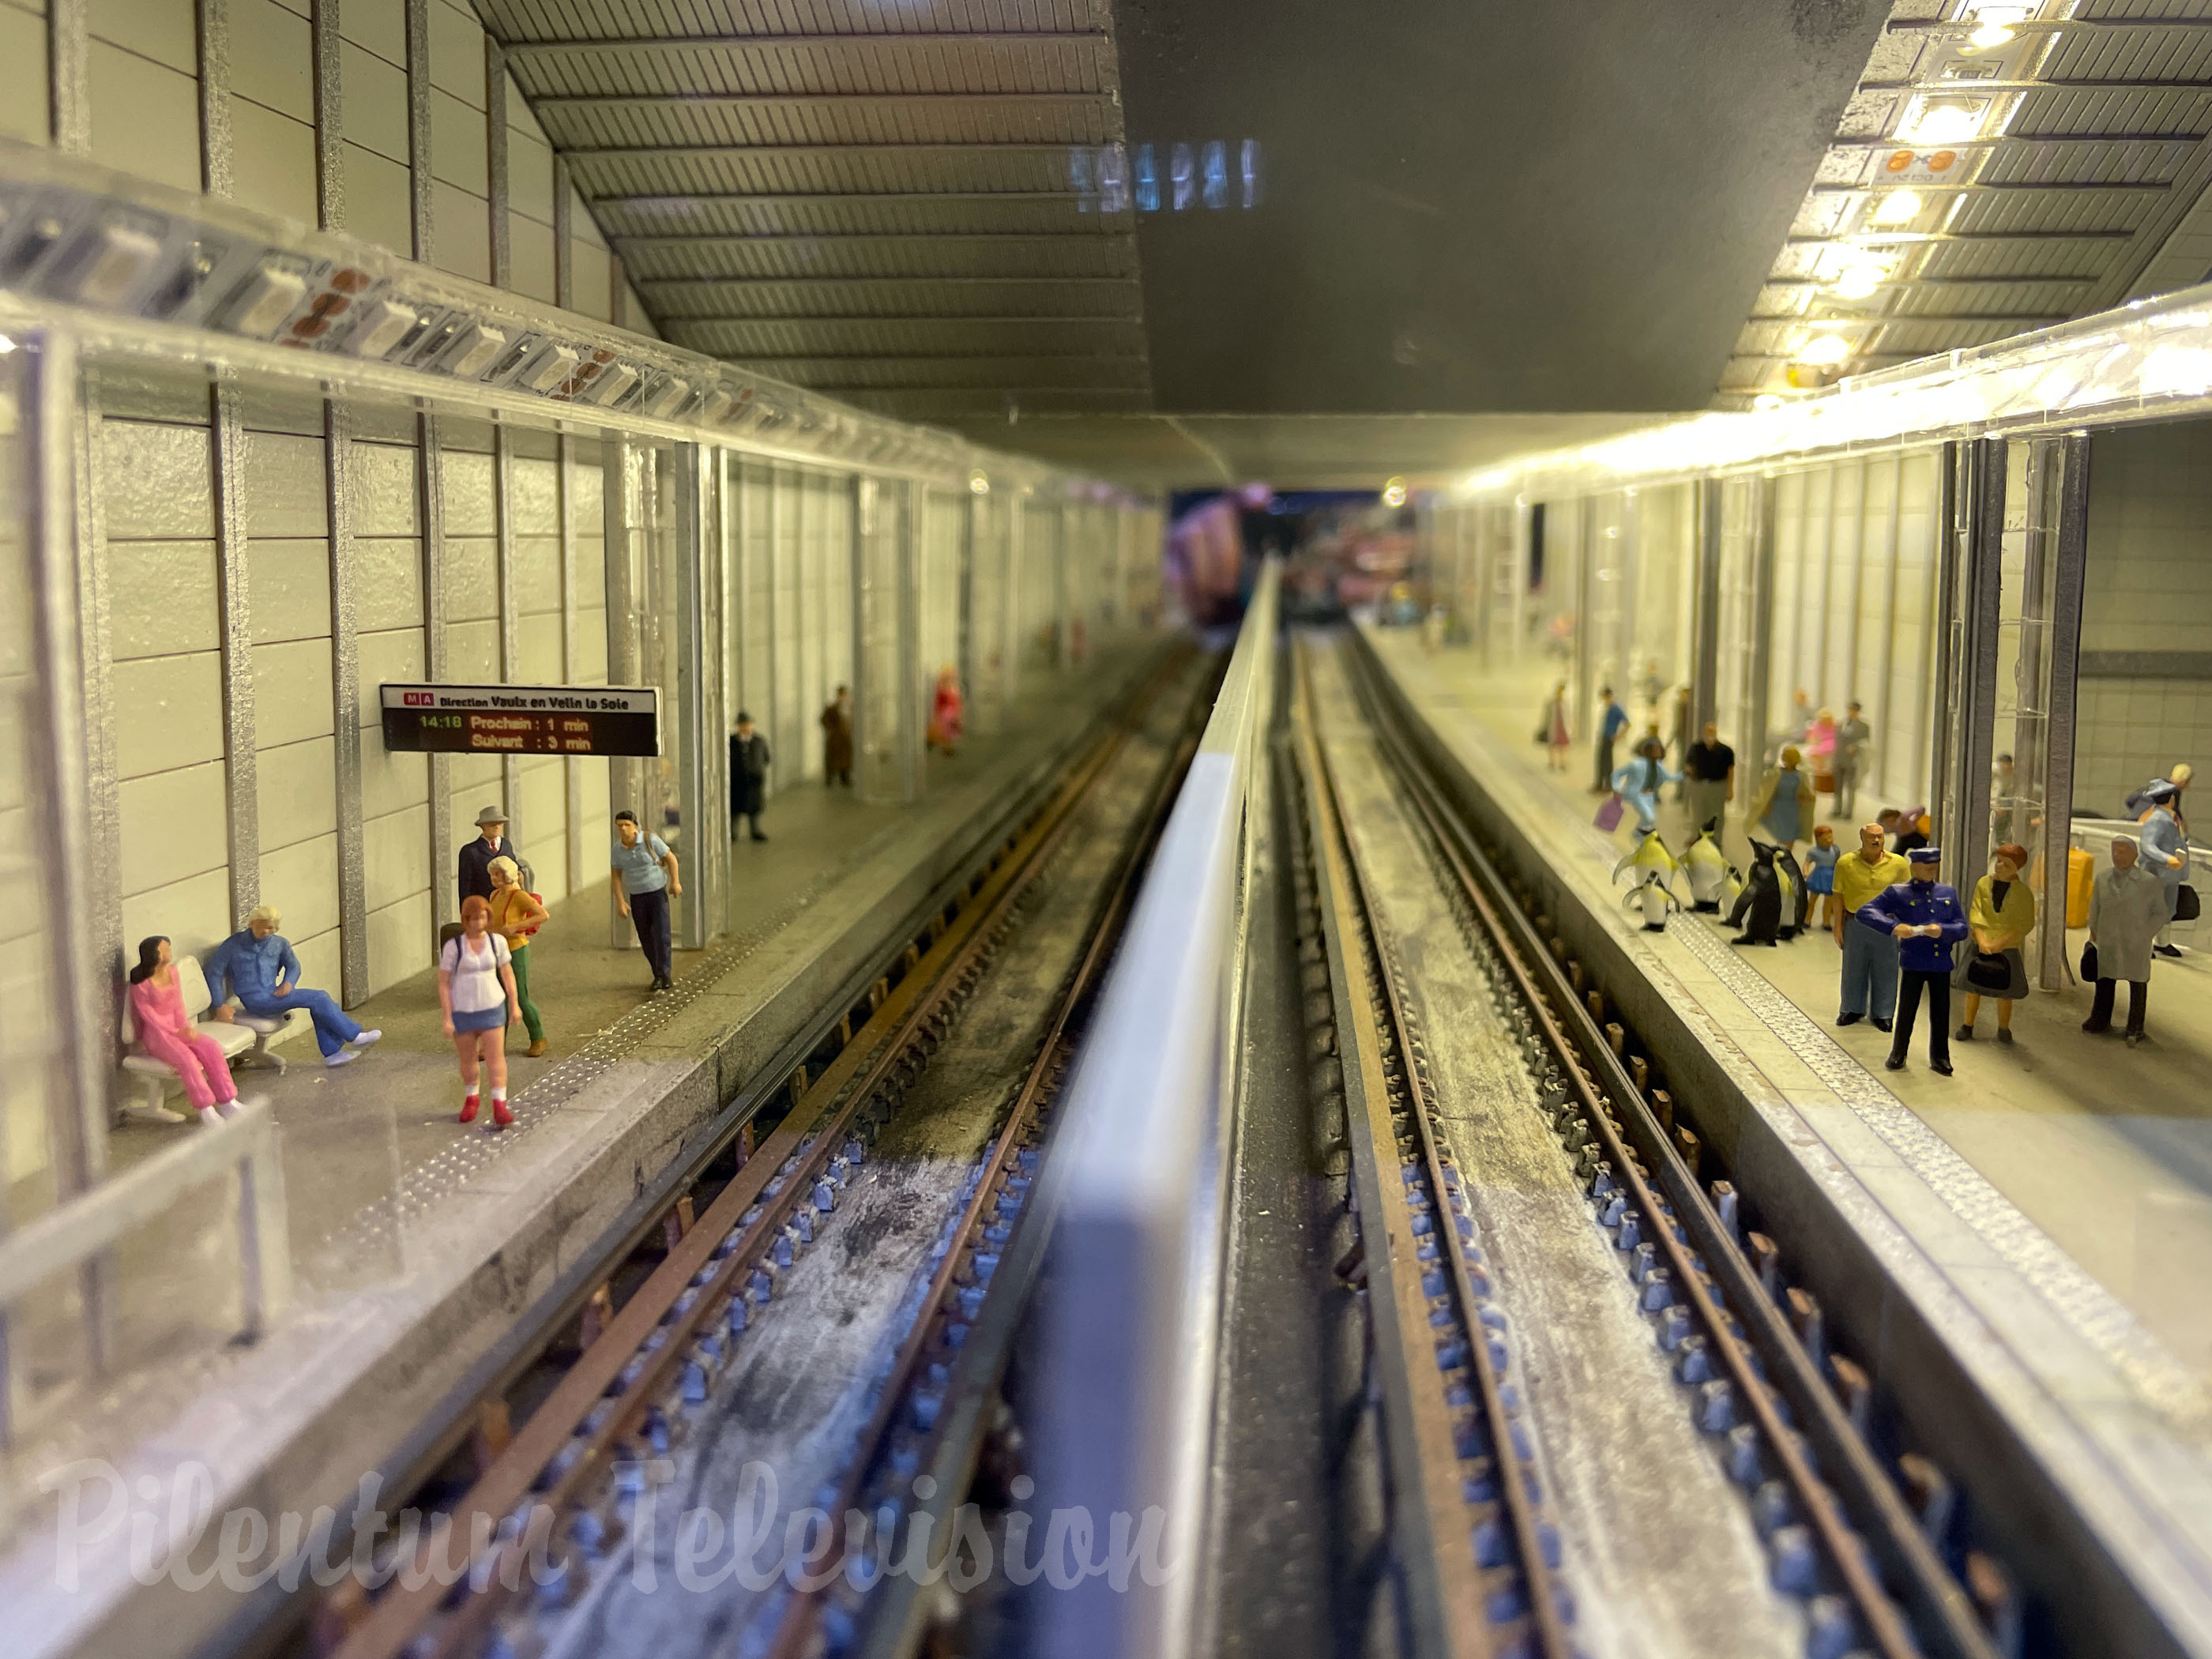 Mini World Lyon - The Largest Model Railway Layout in HO Scale of France - Model Train Cab Ride